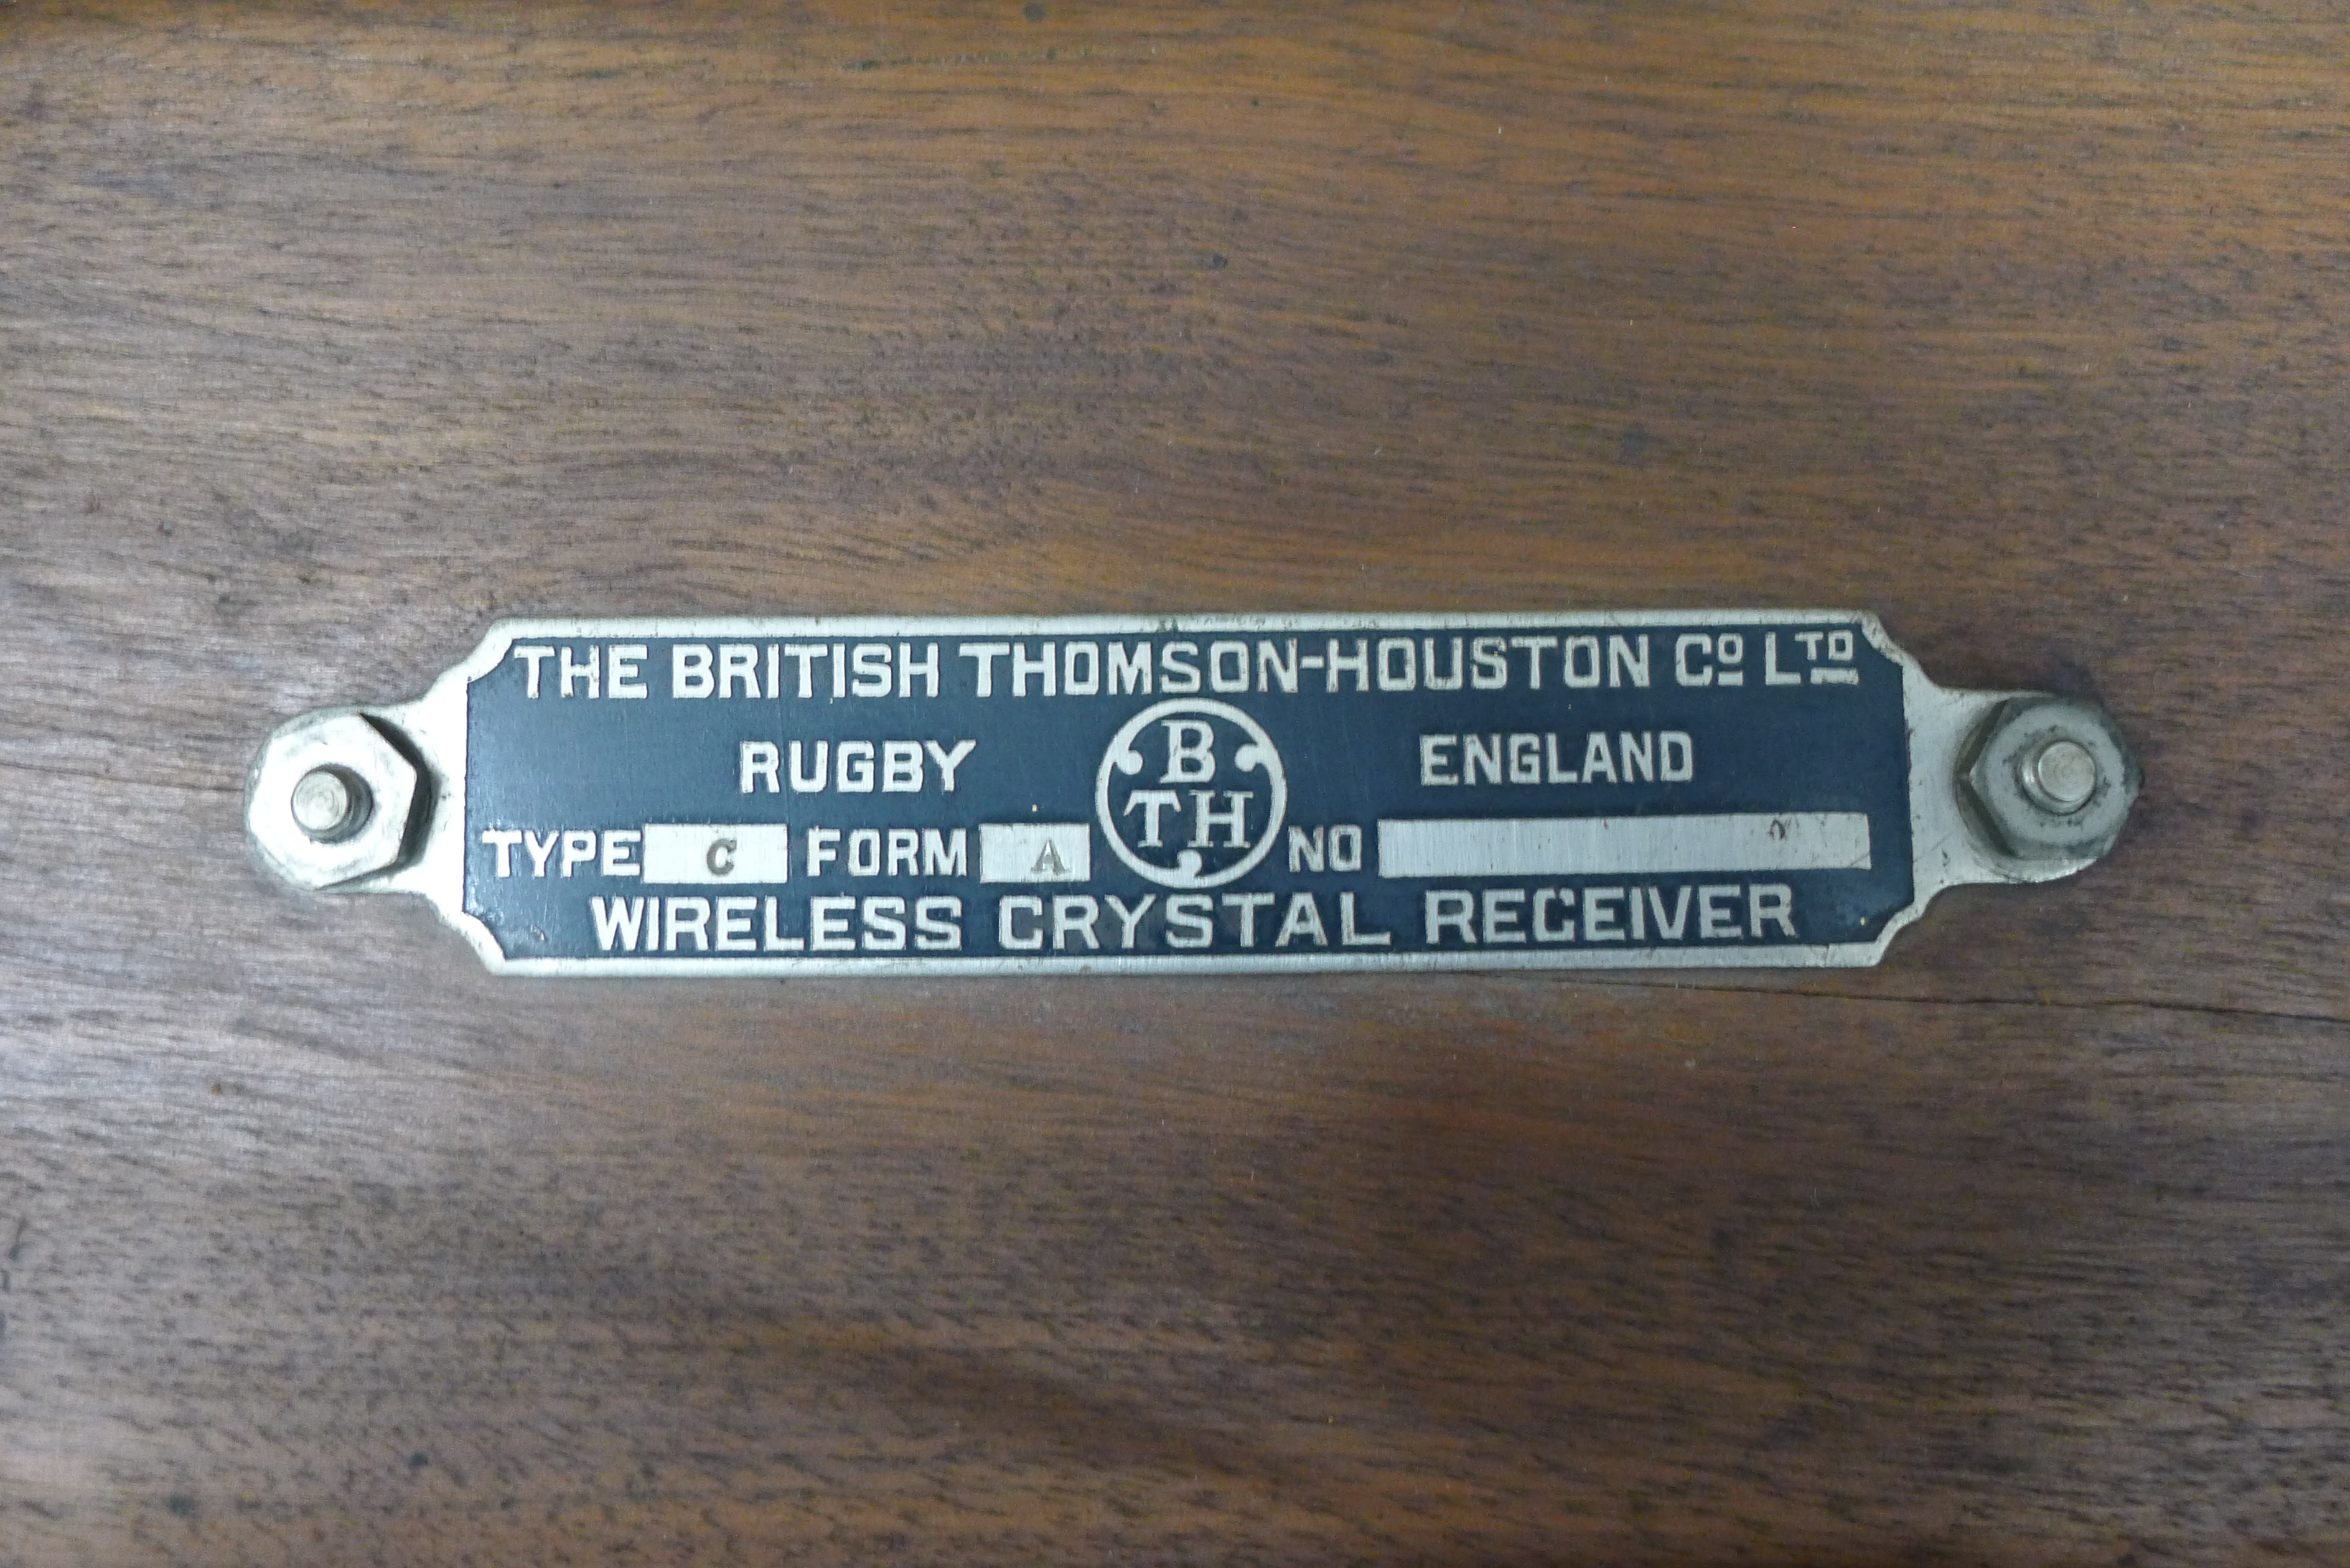 A BTH (British Thomson-Houston Co Lt) Wireless Crystal Receiver and headphones. 28.5 cm wide. - Image 5 of 9